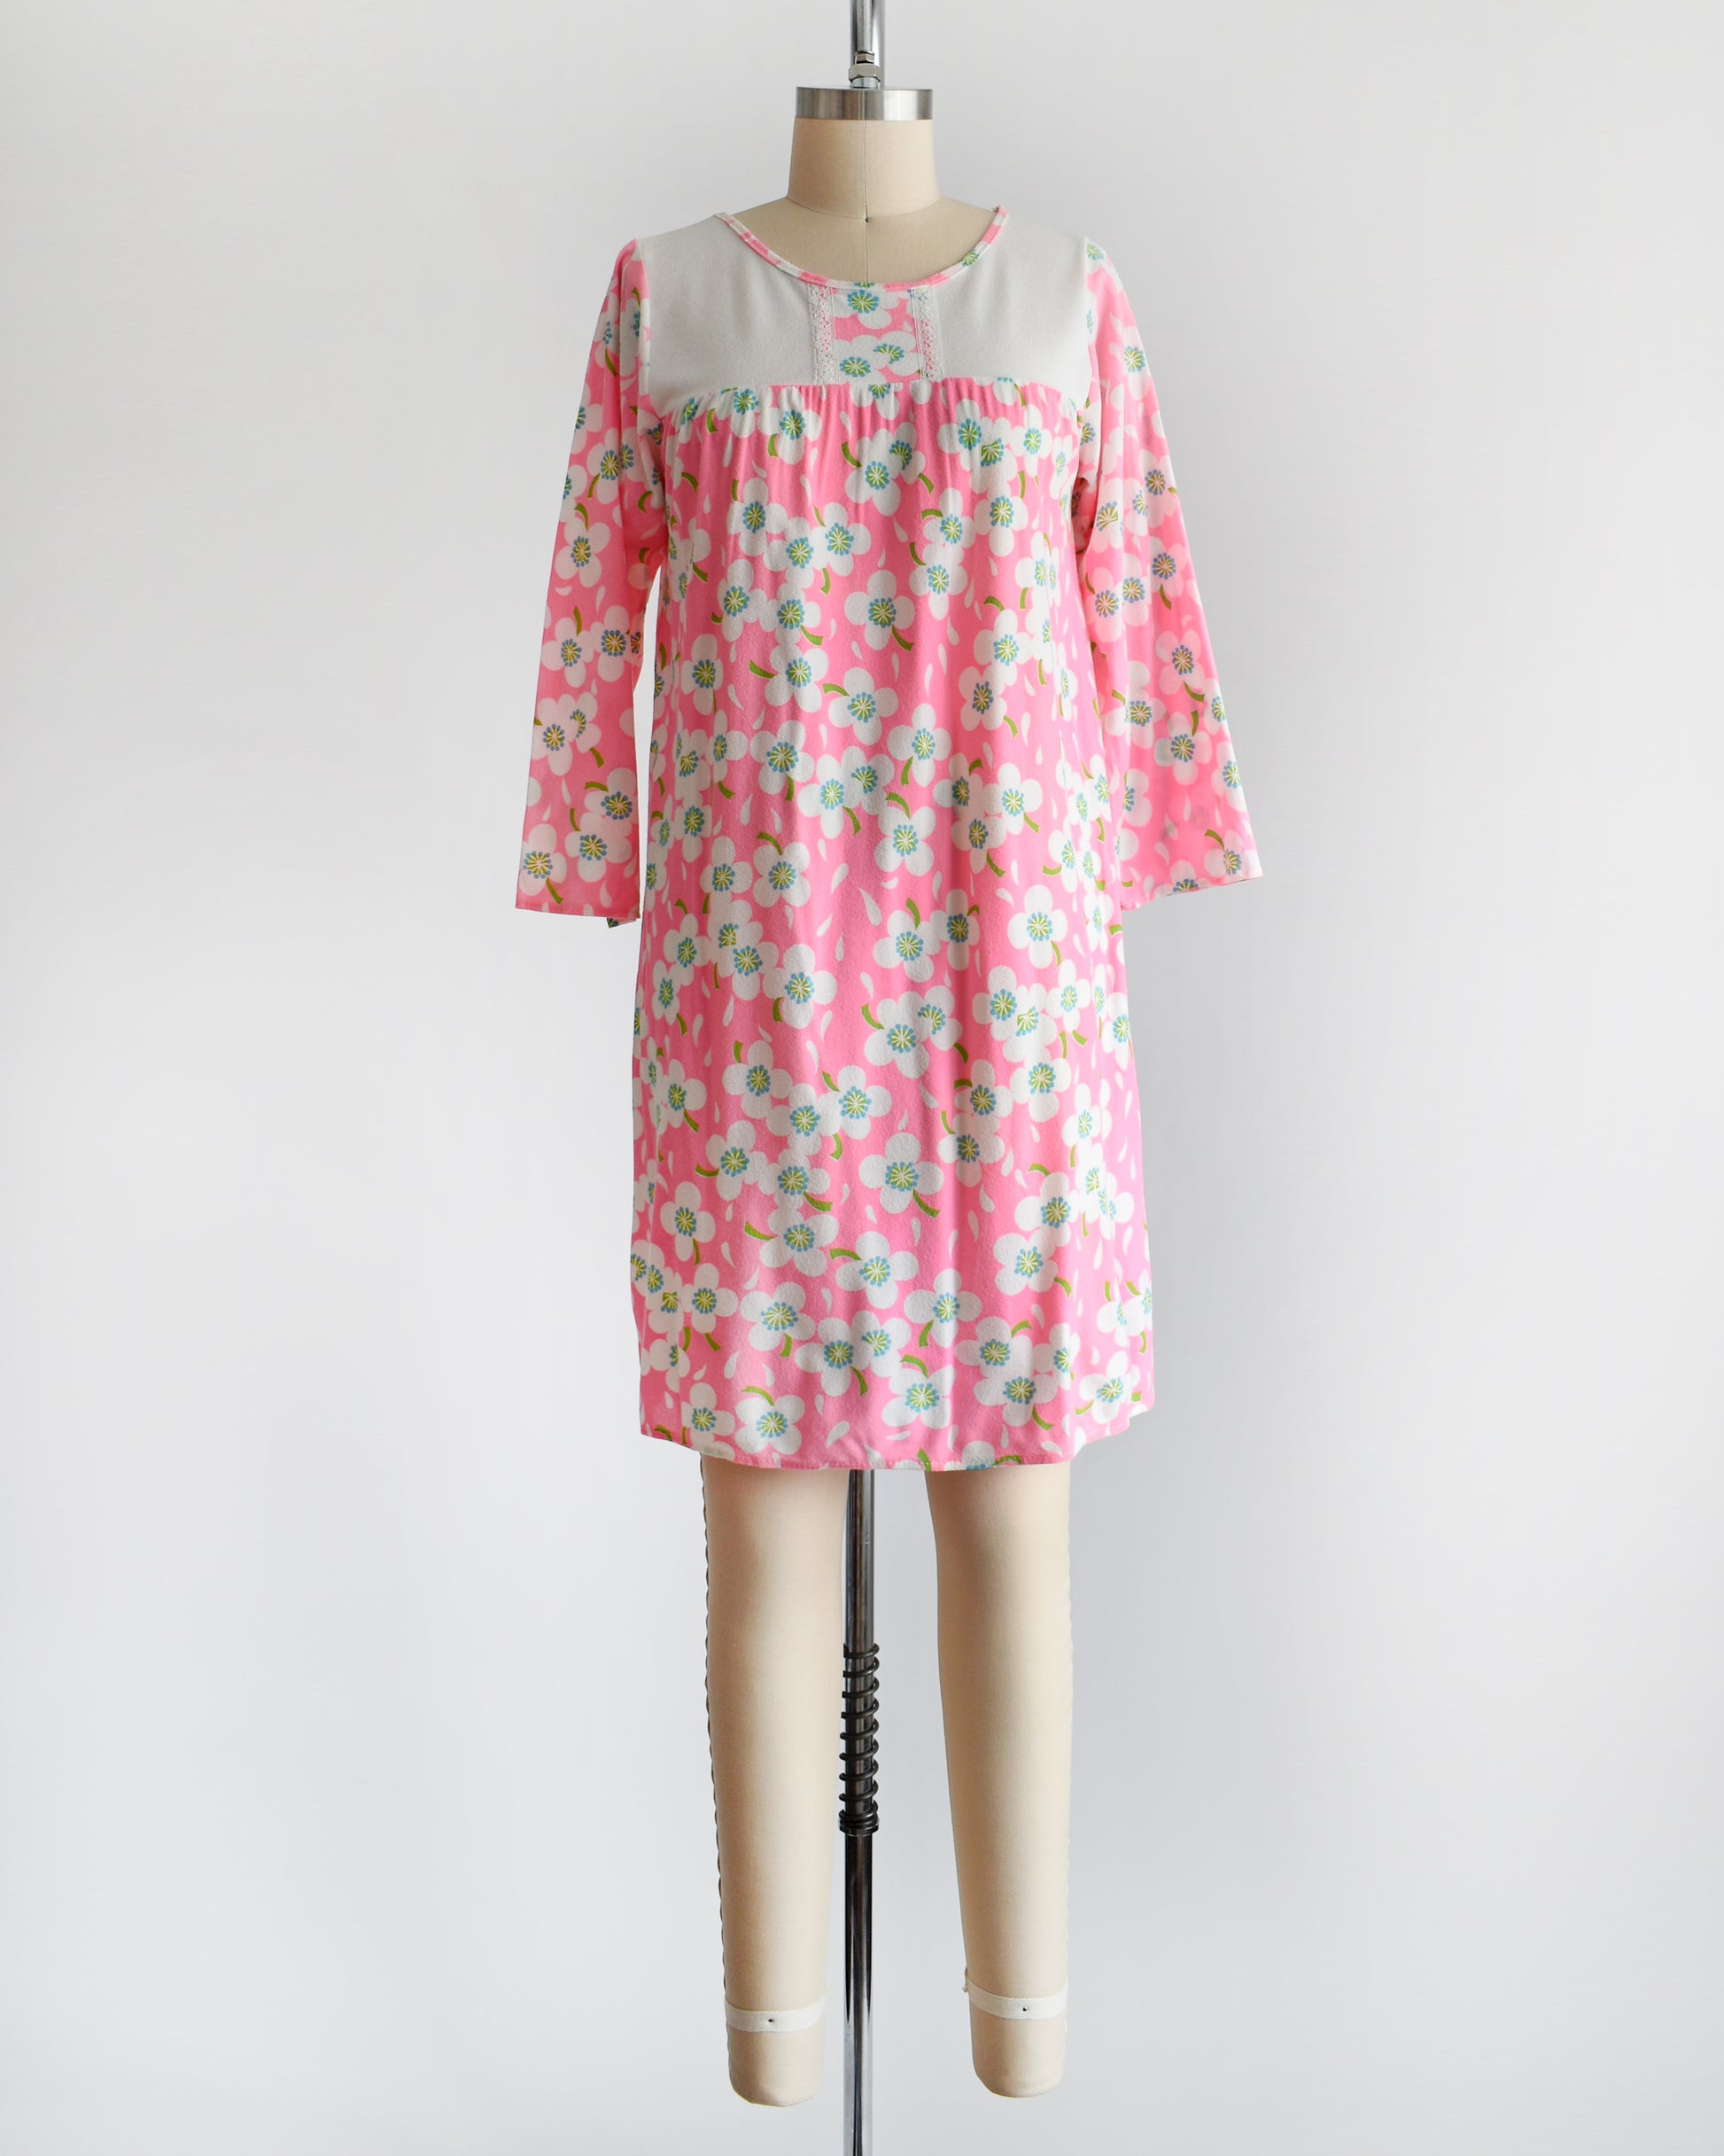 a vintage 1970s pink flower power nightgown